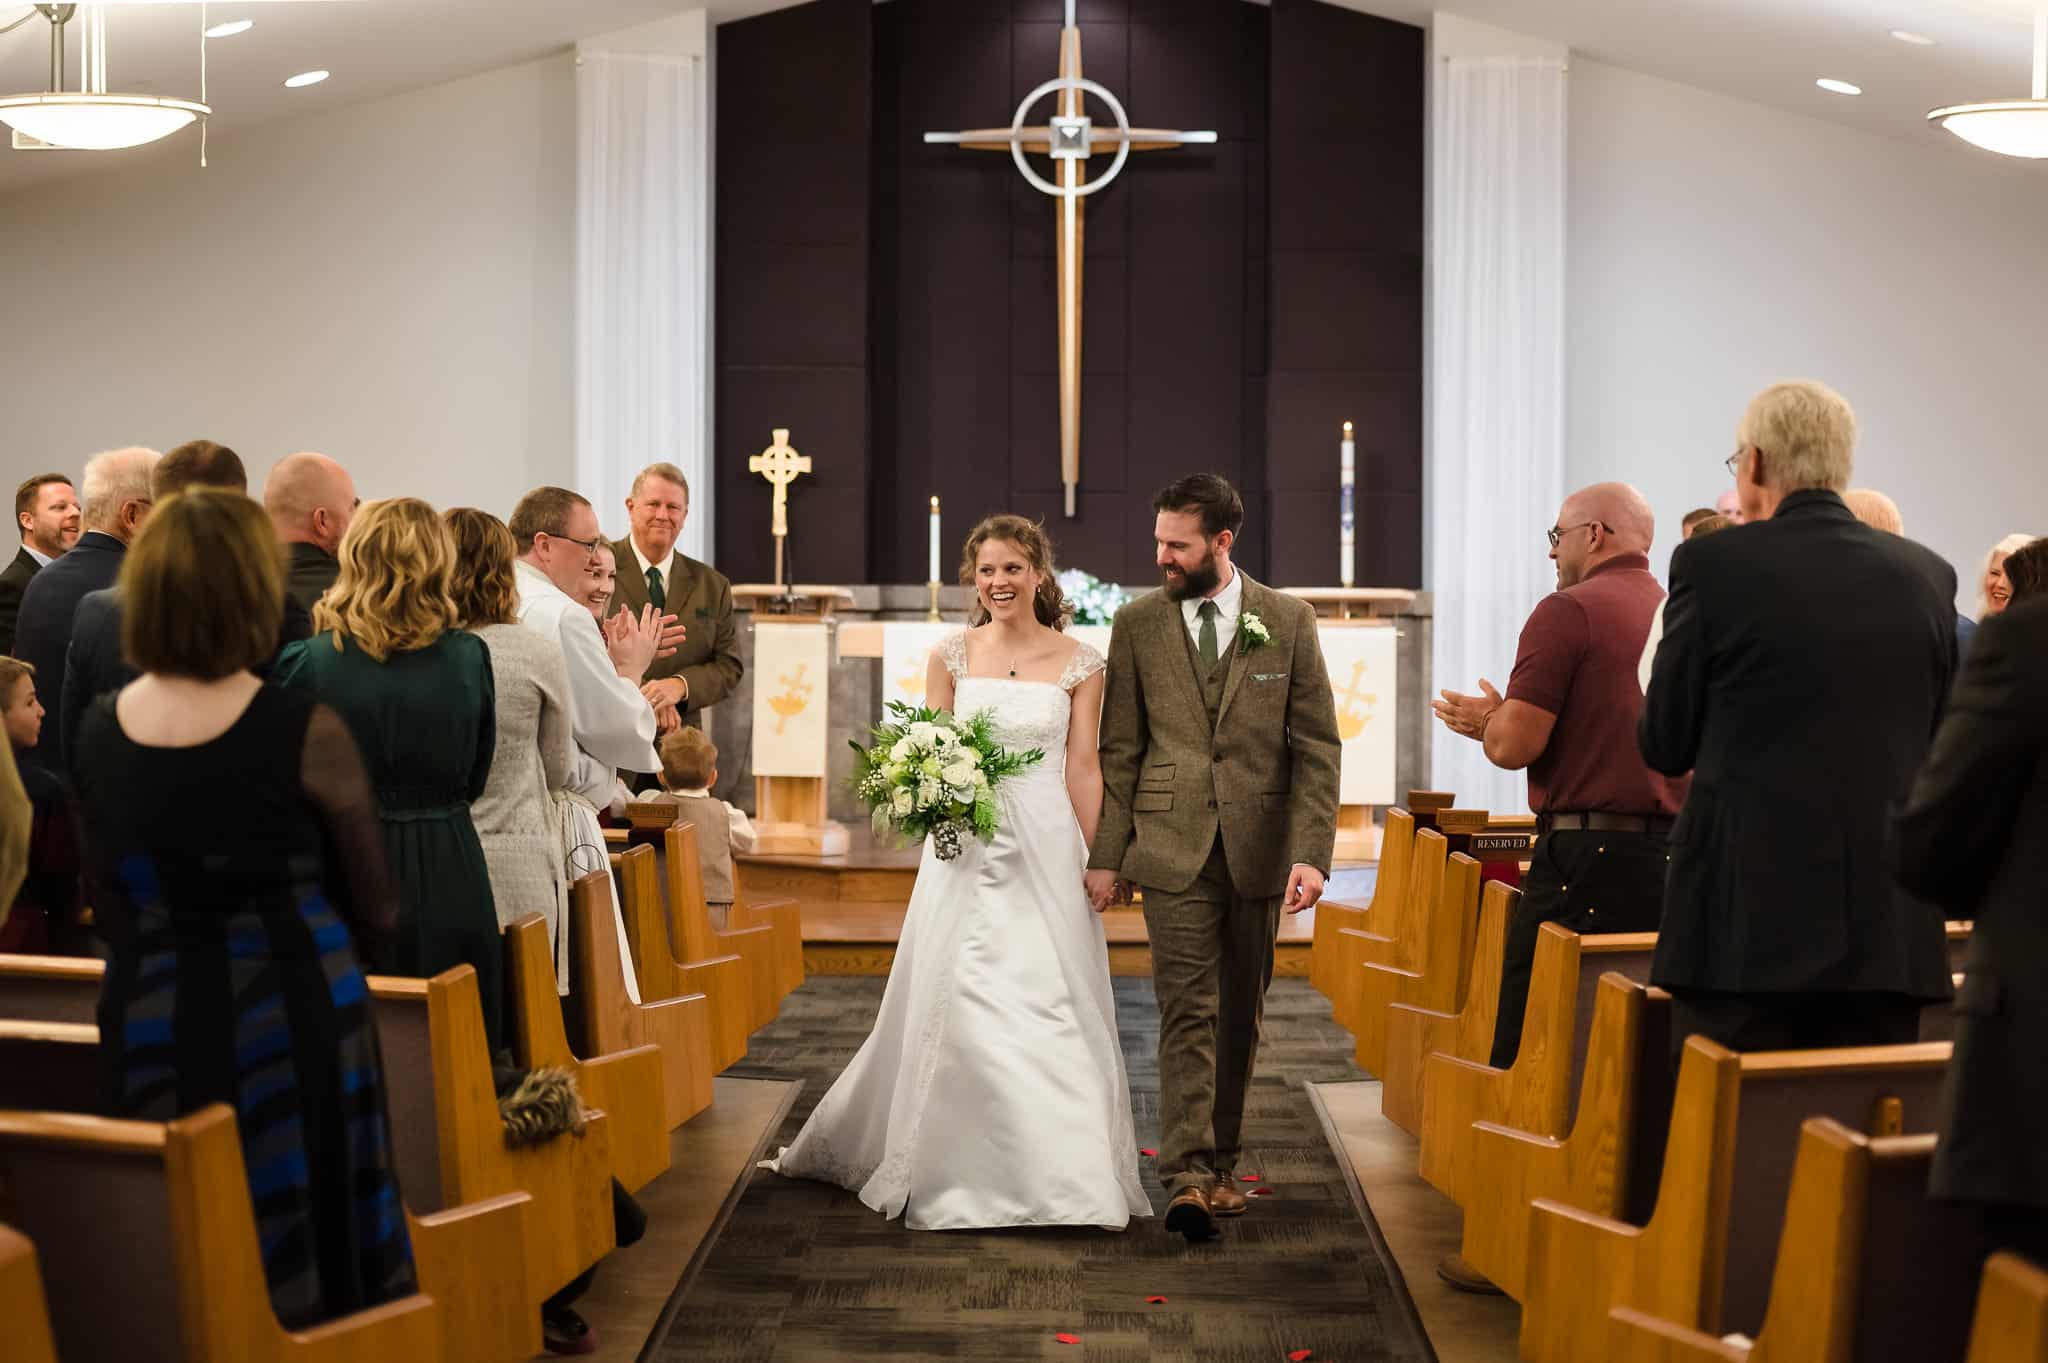 The ceremony completed, the wedding couple hold hands and walk down the aisle of the church between the pews.